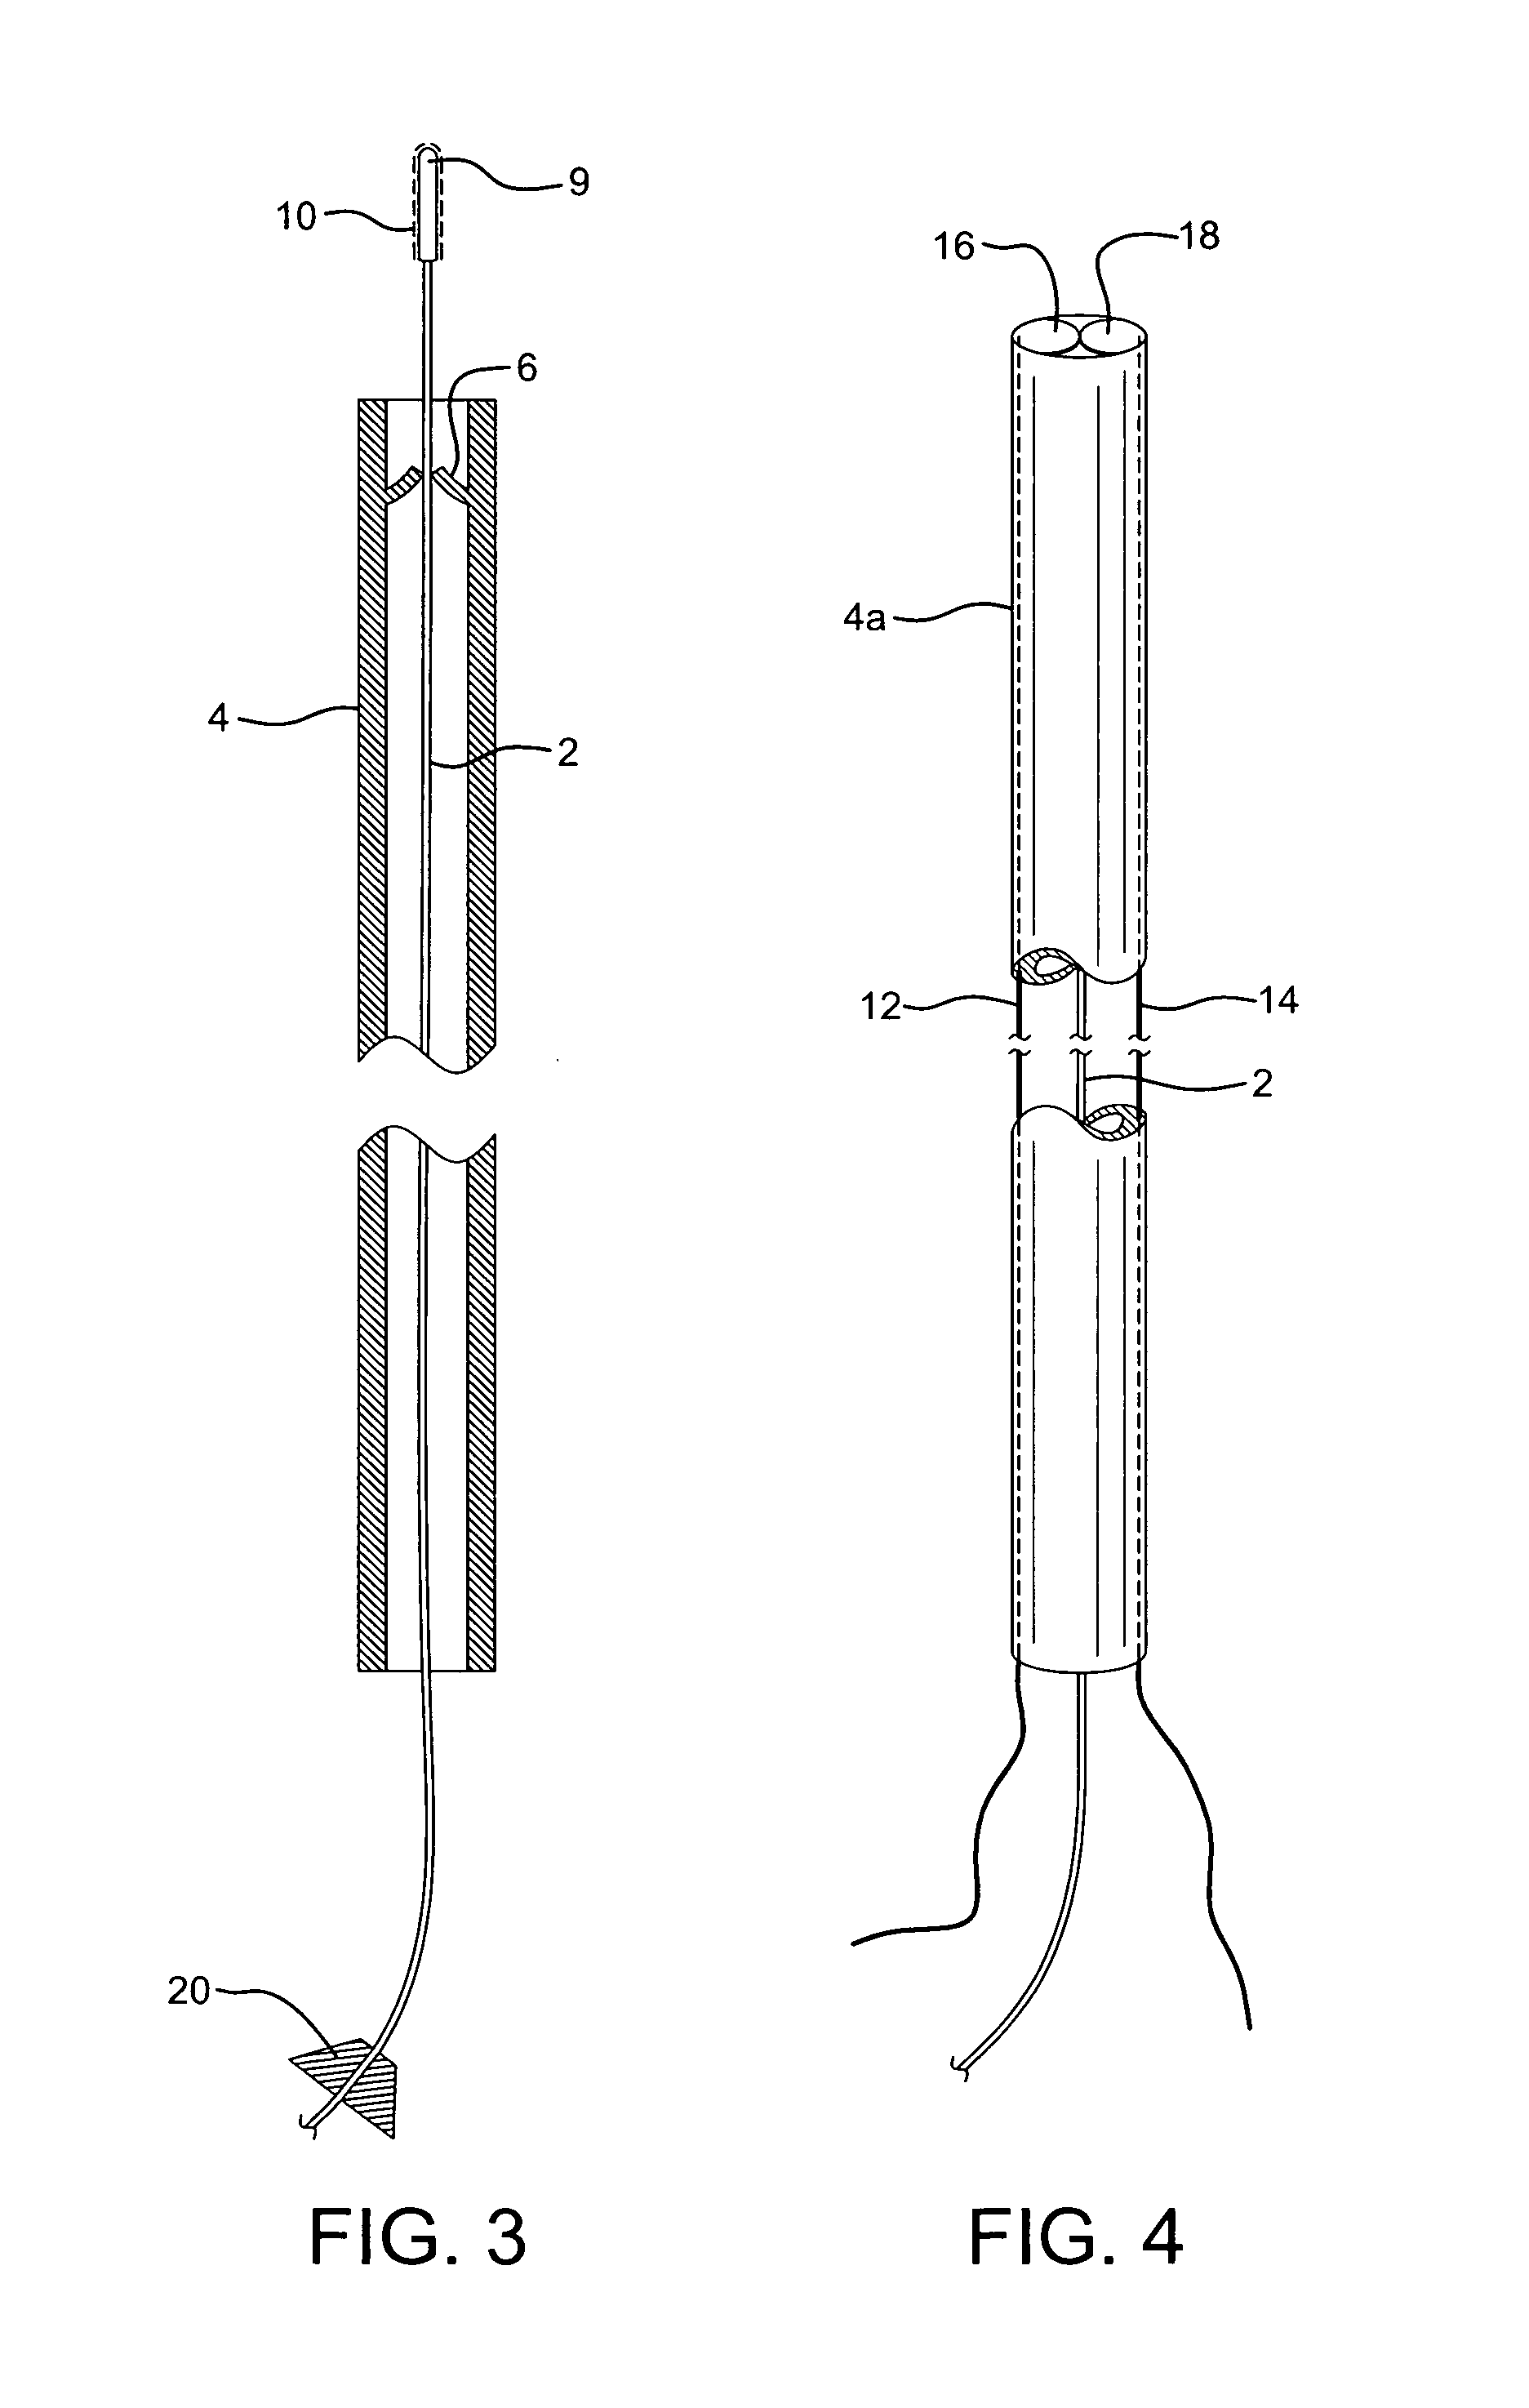 Endovascular device and clotting system for the repair of vascular defects and malformations